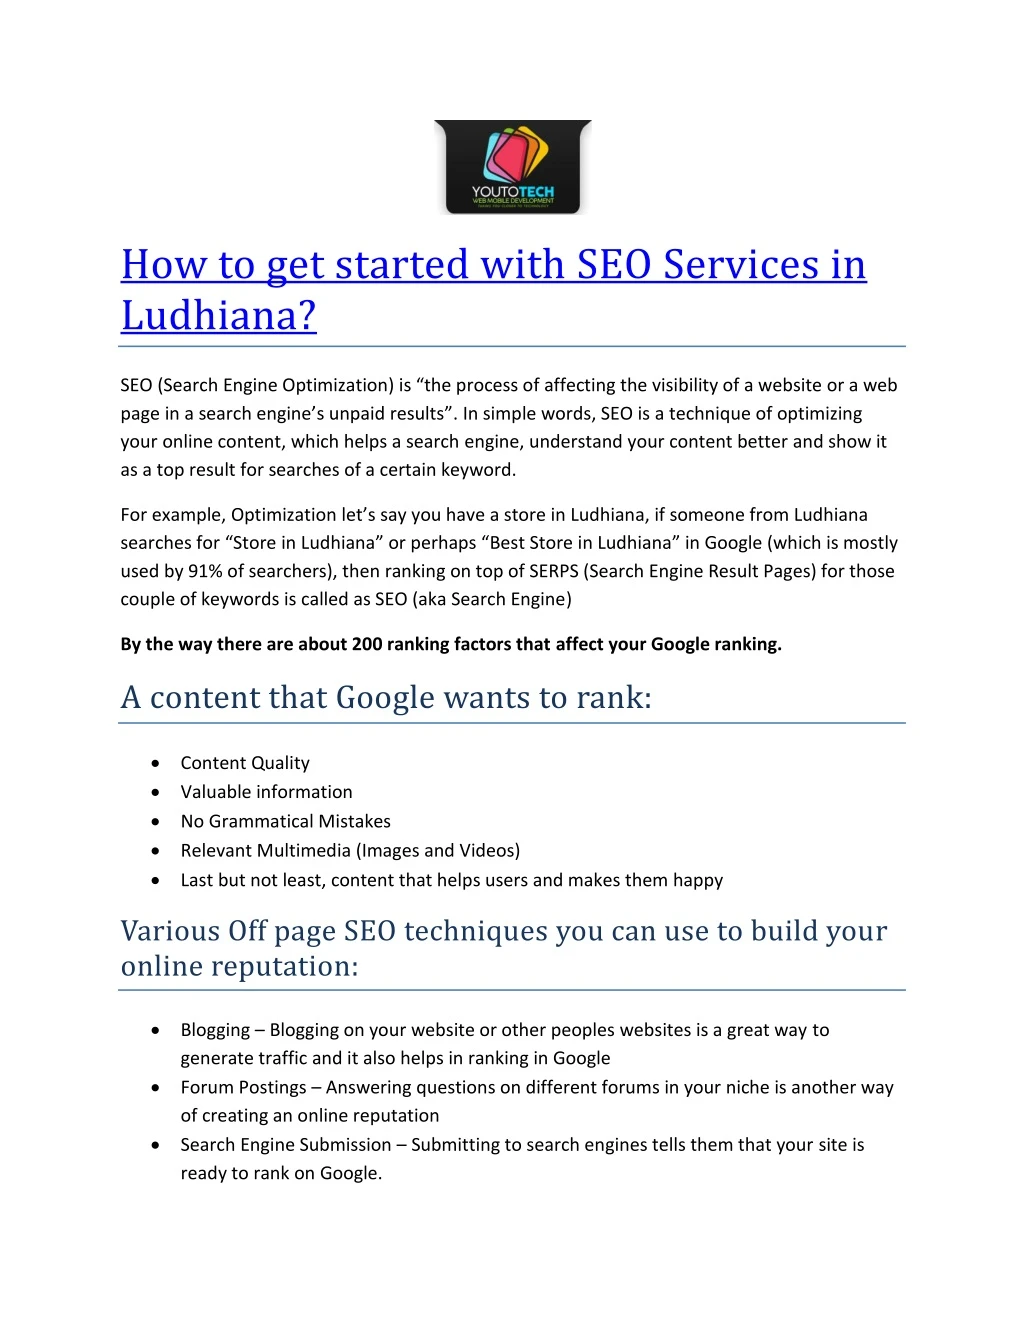 how to get started with seo services in ludhiana